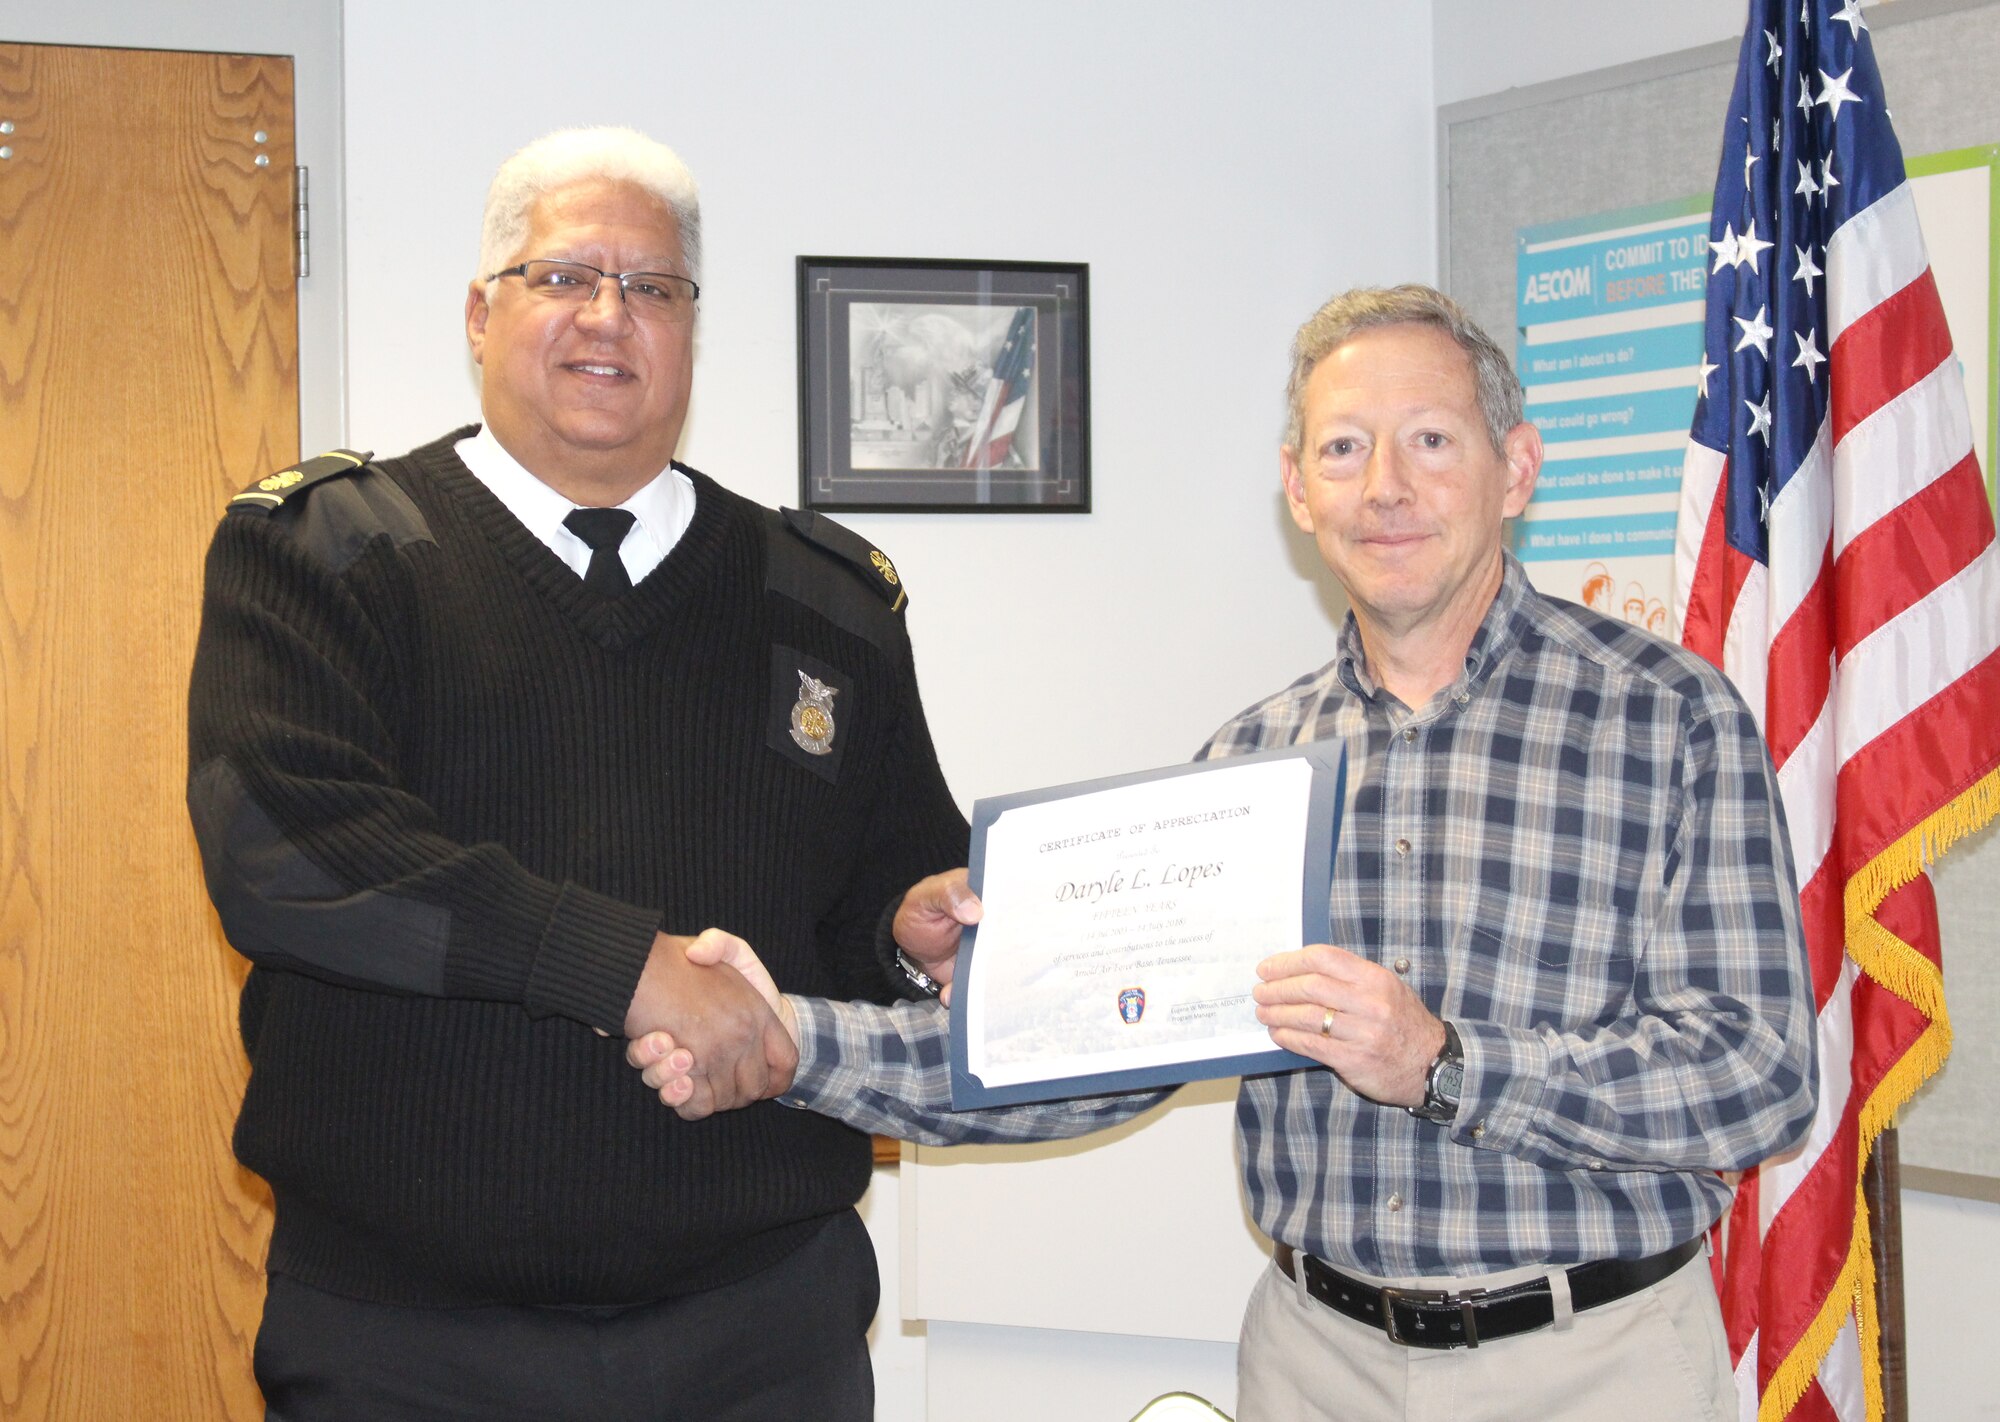 Daryle Lopes, left, chief of Arnold Fire and Emergency Services, receives a certificate recognizing his 15 years of service from Eugene Mittuch, project manager of the Facility Support Services contract at Arnold Air Force Base. (U.S. Air Force photo by Deidre Ortiz)